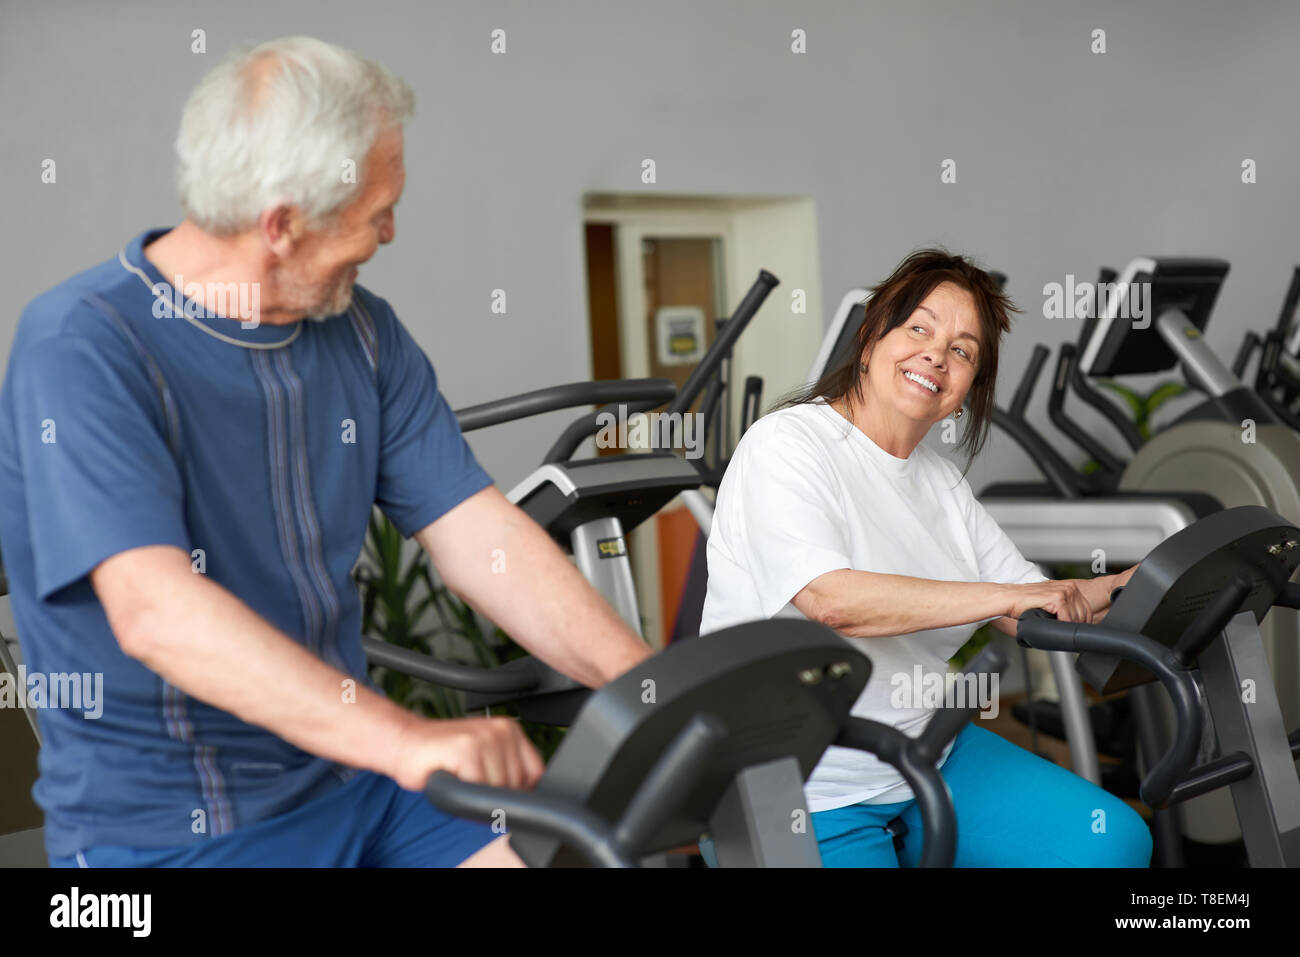 https://c8.alamy.com/comp/T8EM4J/beautiful-couple-of-seniors-working-out-at-gym-elderly-man-and-woman-training-on-machine-at-fitness-club-focus-on-woman-aged-people-doing-cardio-wo-T8EM4J.jpg